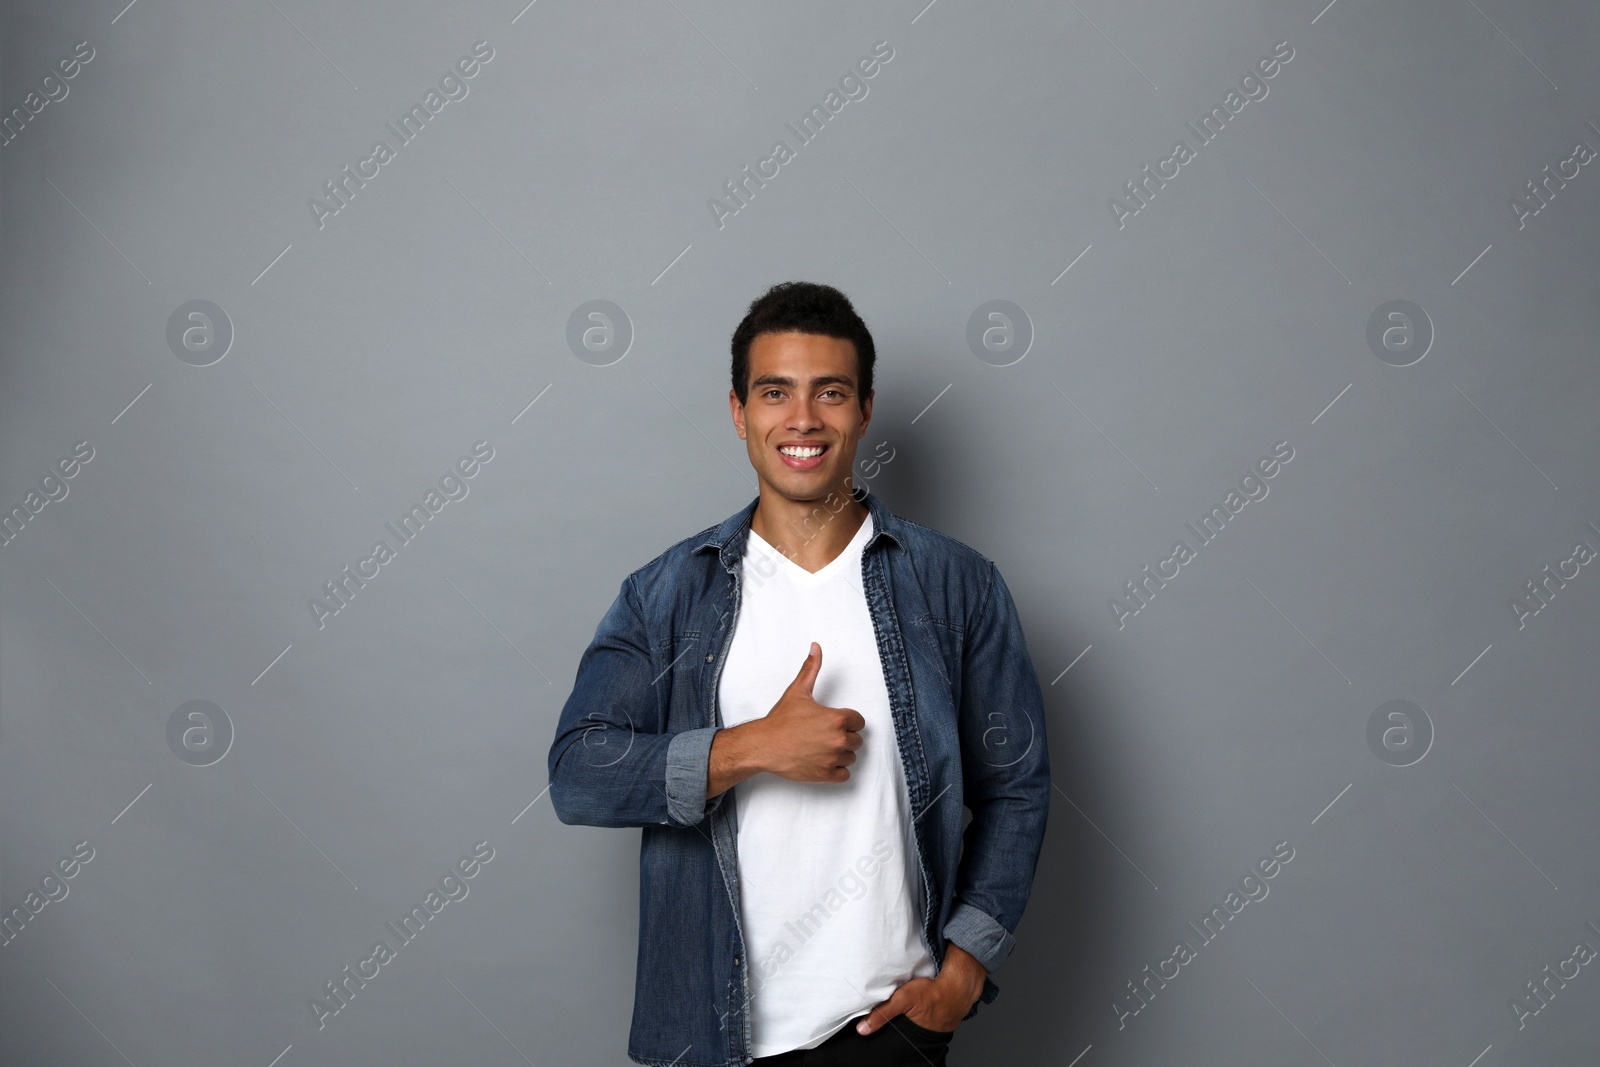 Photo of Handsome young African-American man showing thumbs-up gesture on grey background